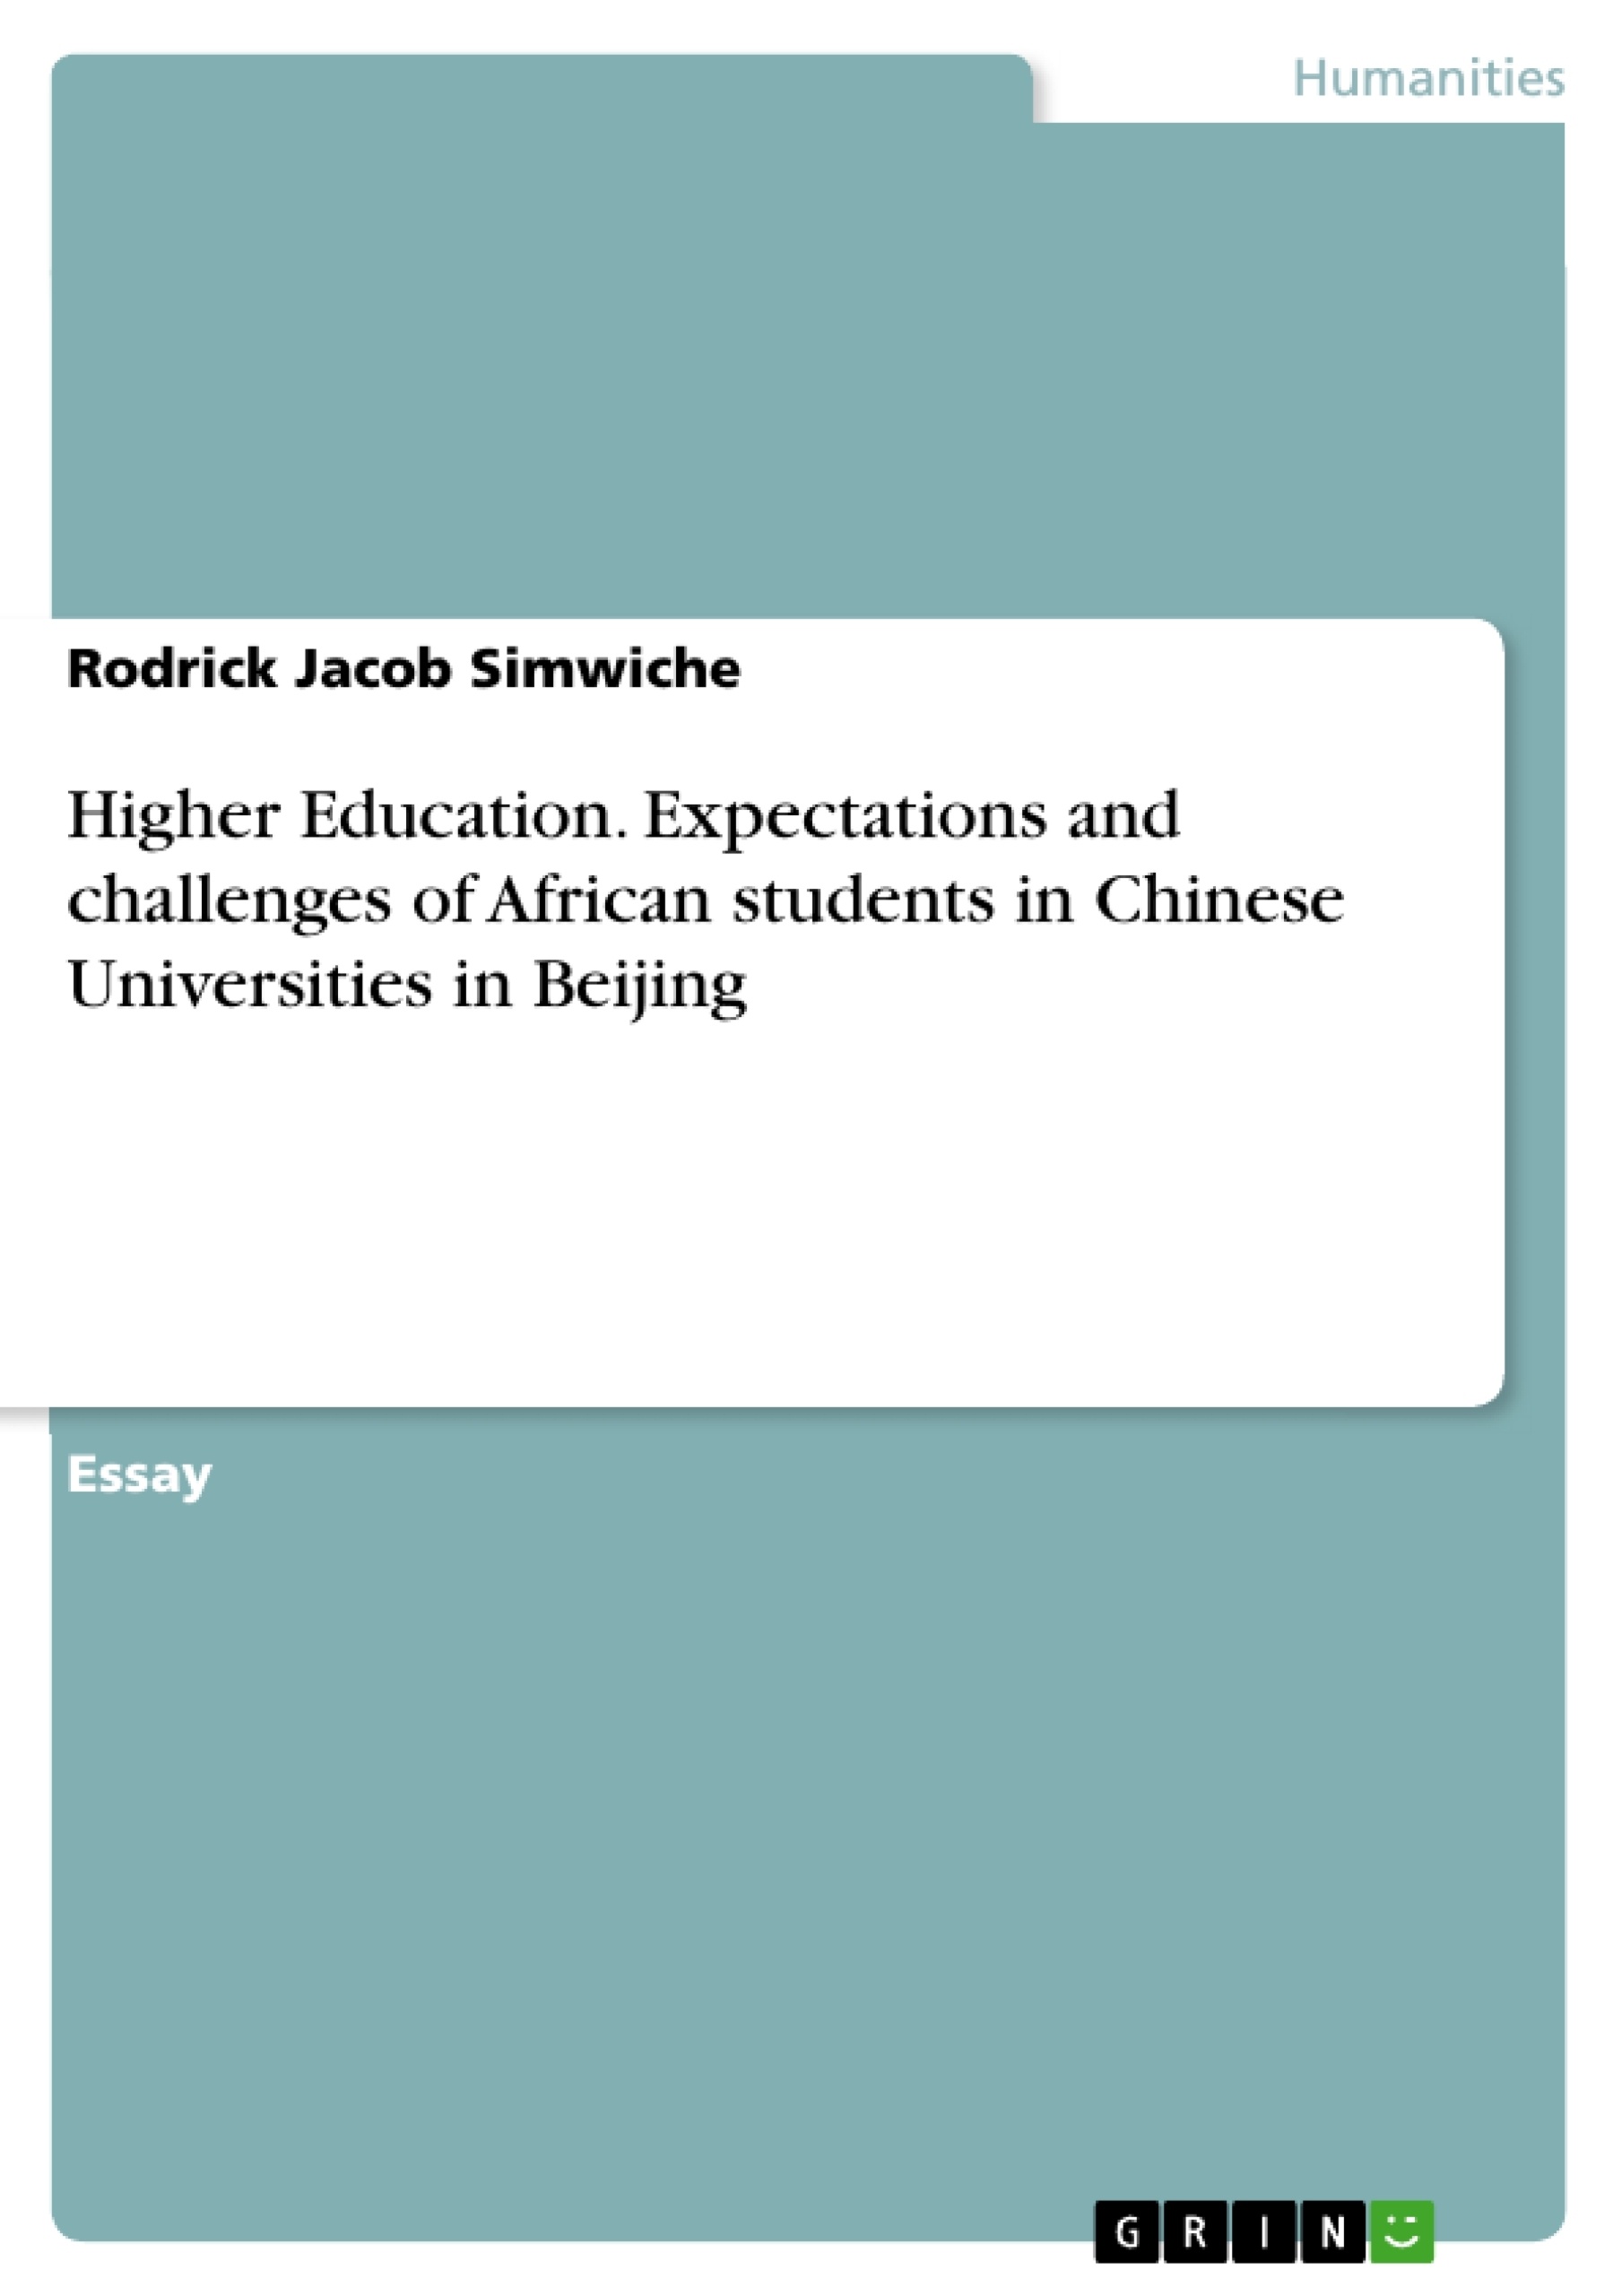 Título: Higher Education. Expectations and challenges of African students in Chinese Universities in Beijing